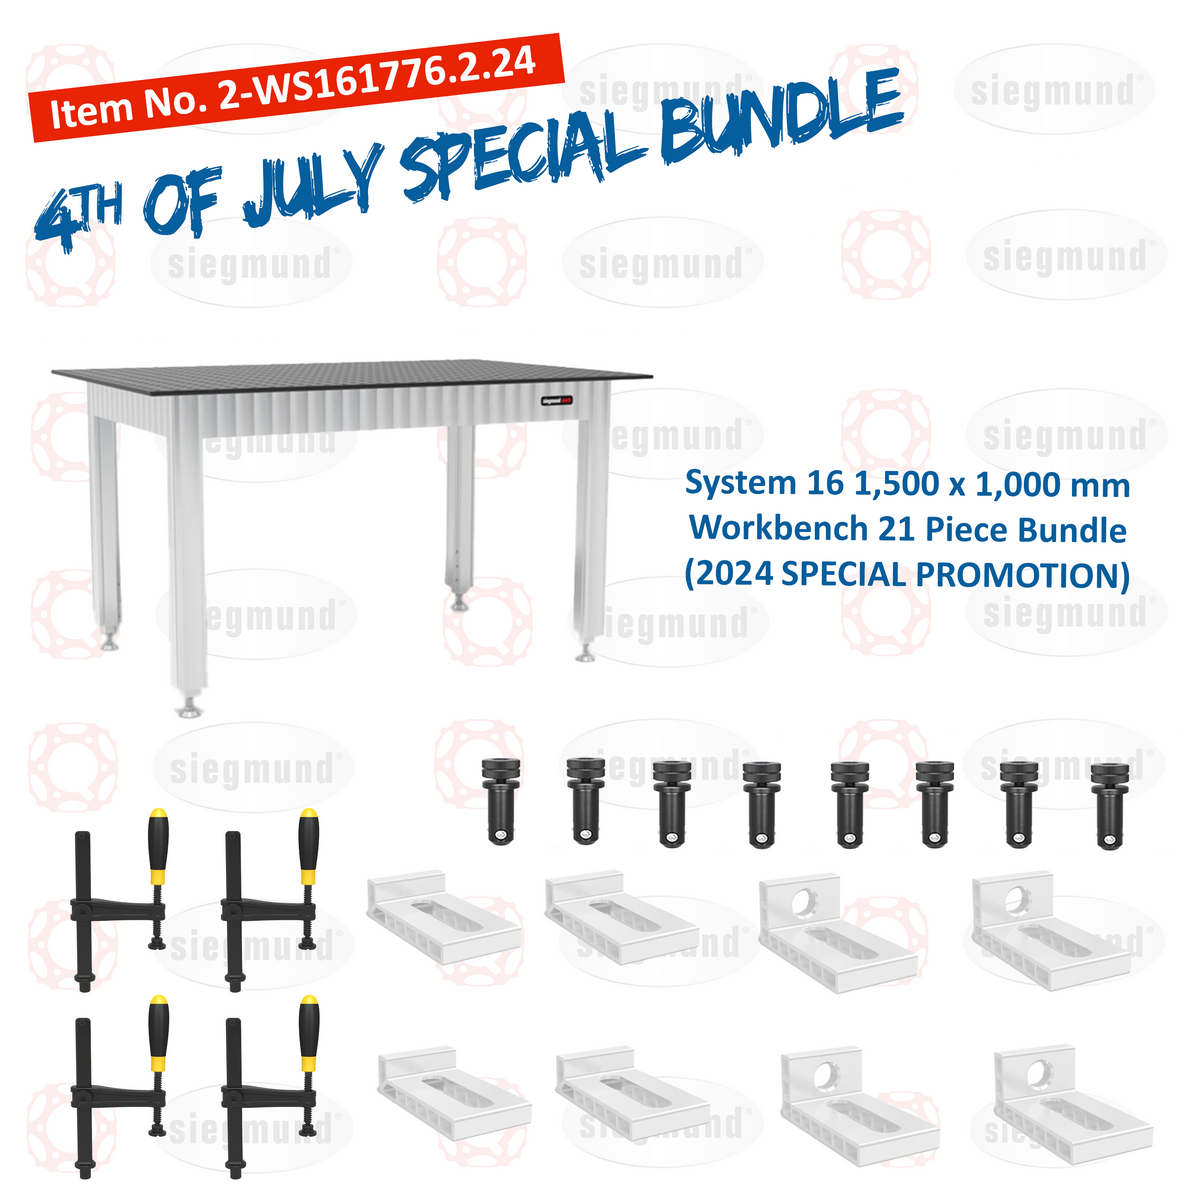 2-WS161776.2.24: 1,500x1,000mm System 16 Workbench, 21 Piece Bundle (JULY 4TH, 2024 SPECIAL PROMOTION)